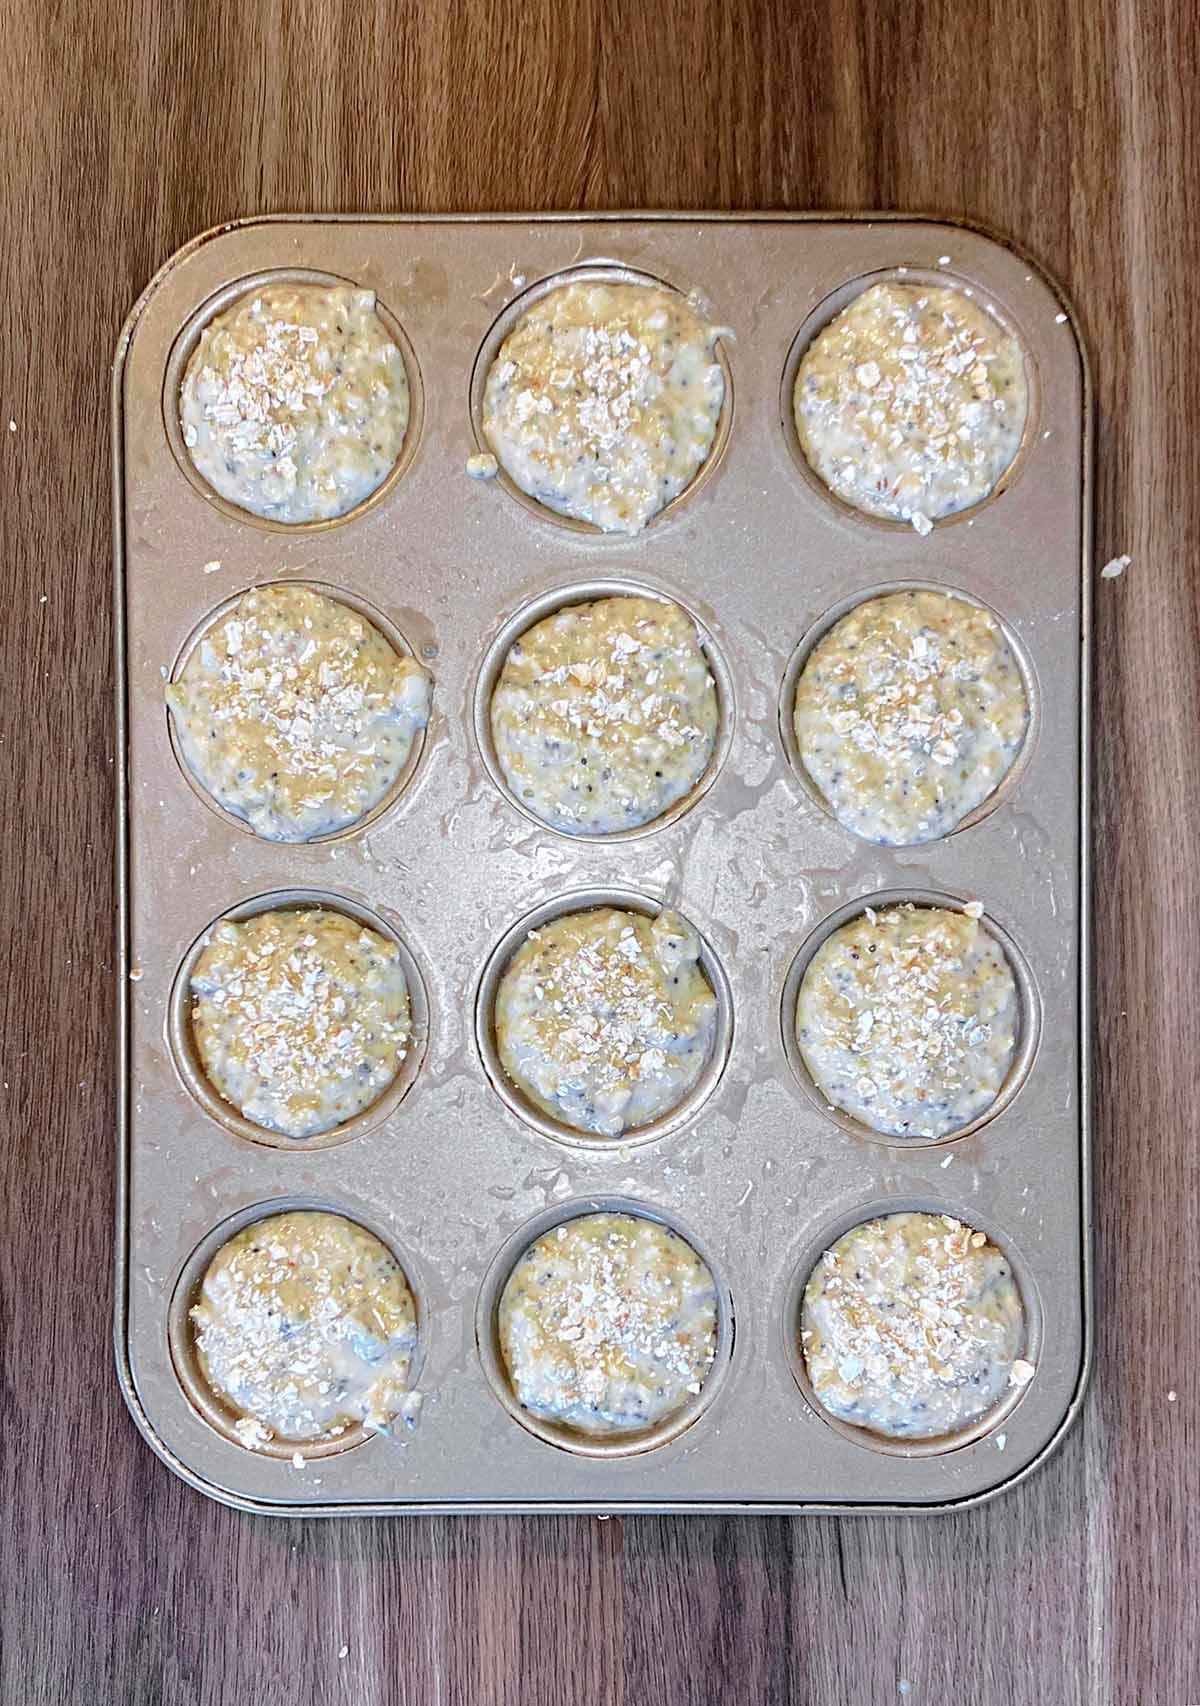 Twelve hole muffin tin filled with muffin batter.